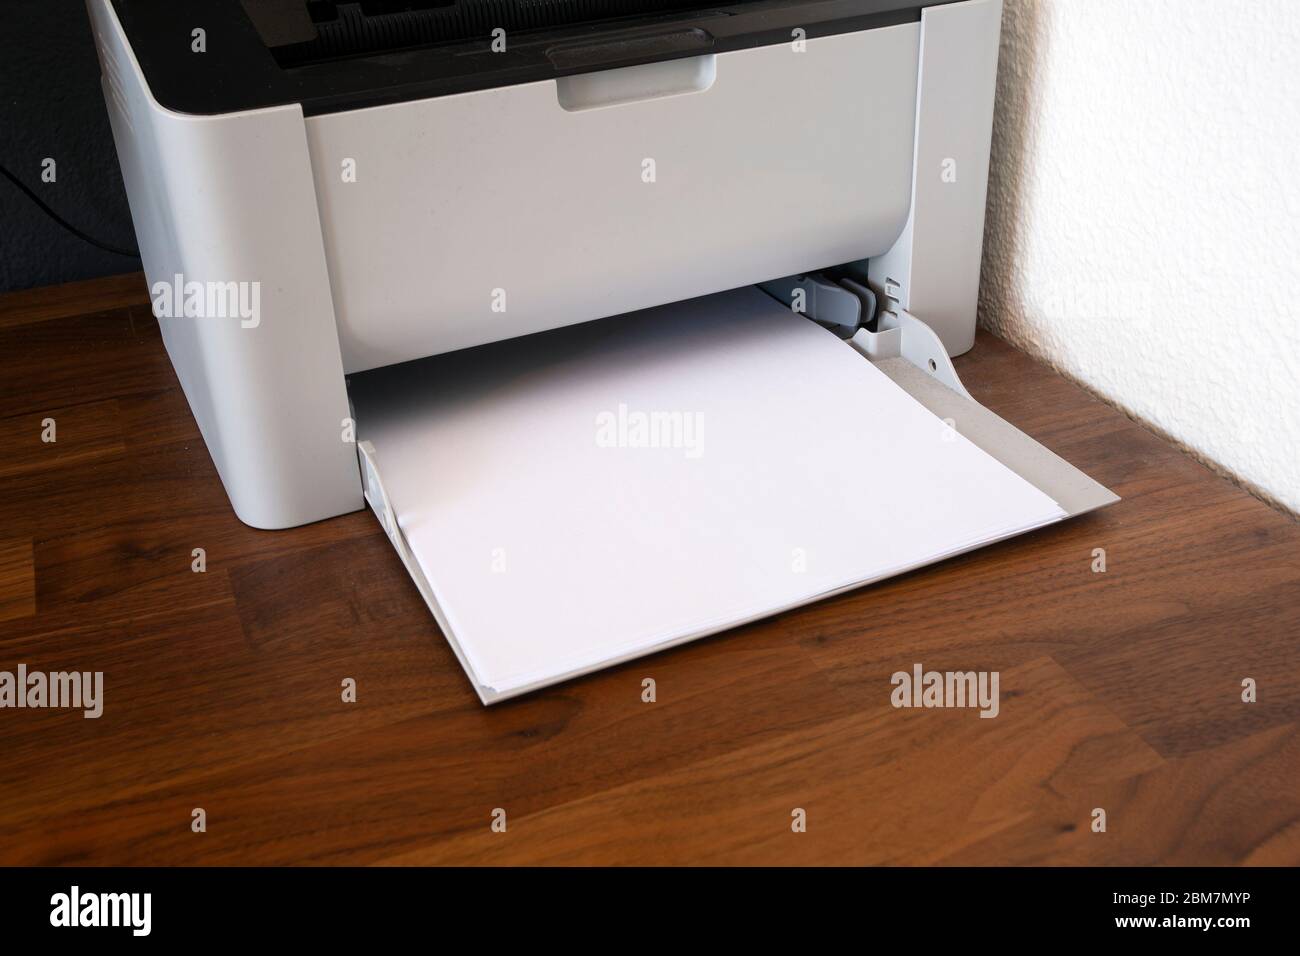 Office digital printer, copier and paper on wooden desk, fax machine  close-up Stock Photo - Alamy